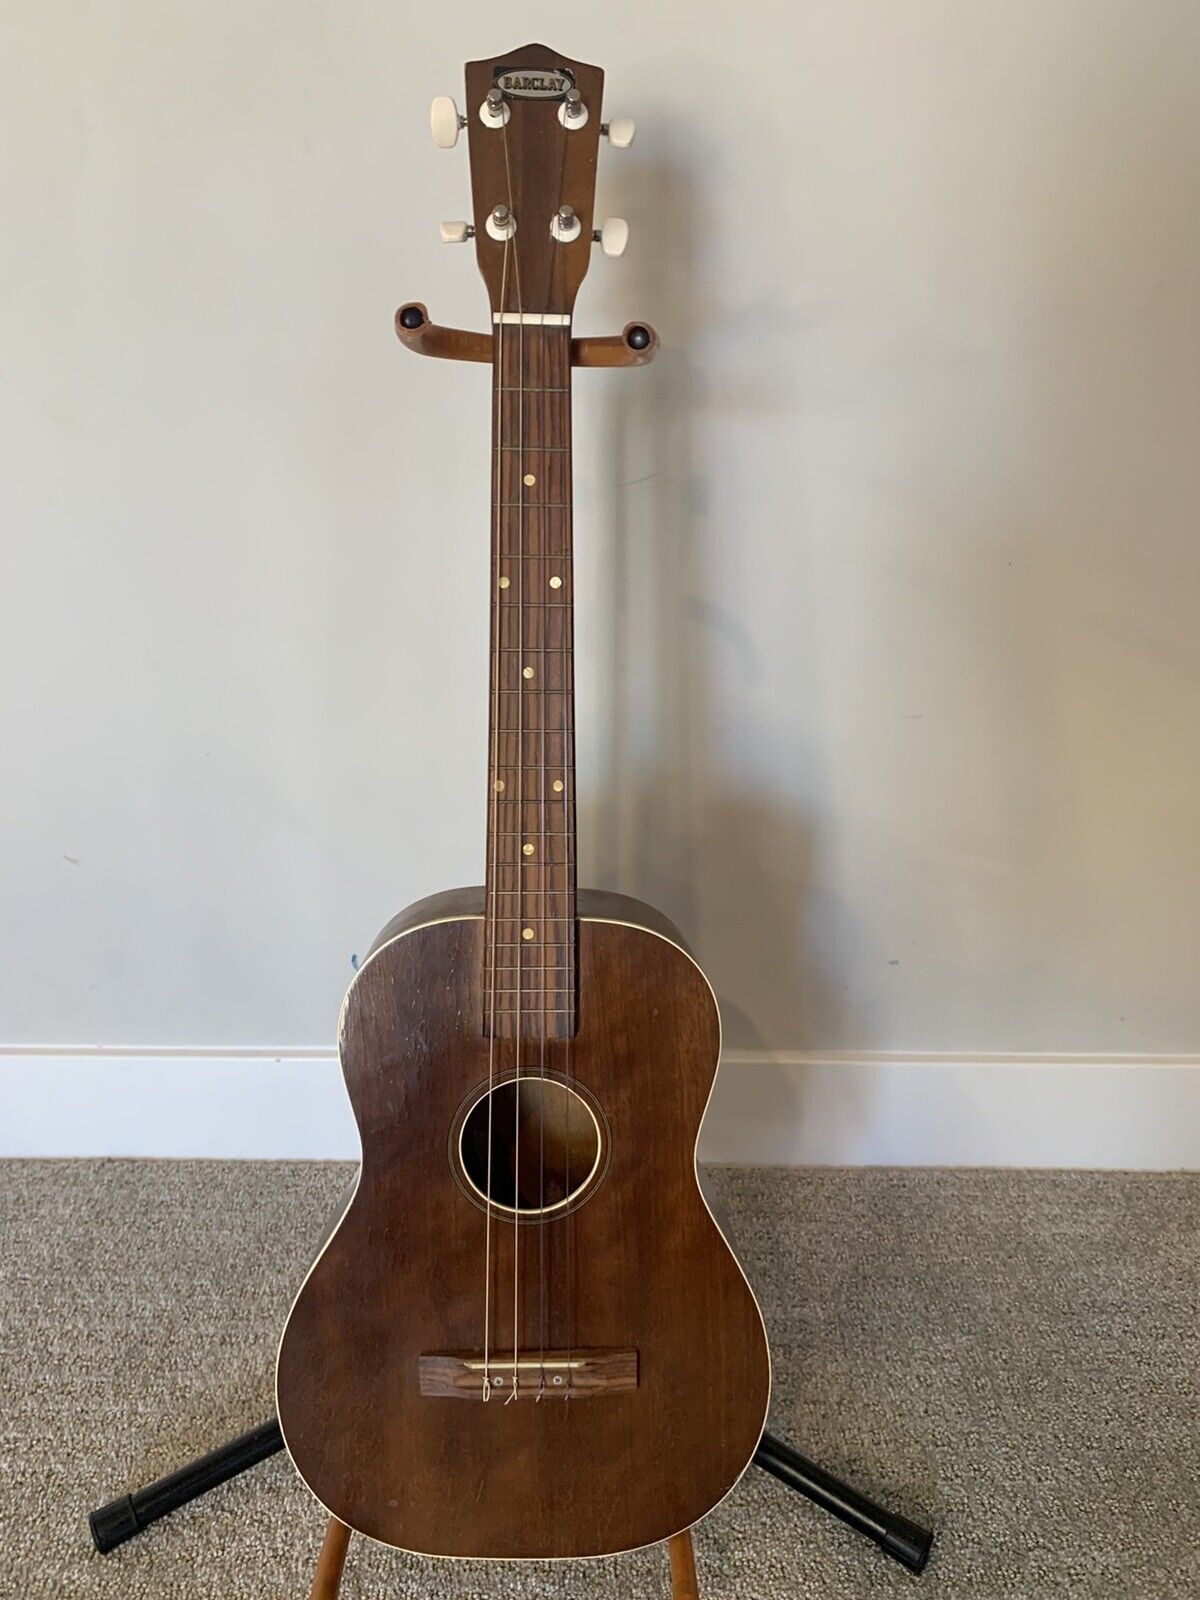 Barclay Limited time trial price Baritone Ukulele 1950’s Free Shipping Cheap Bargain Gift Made Japan 1960’s in